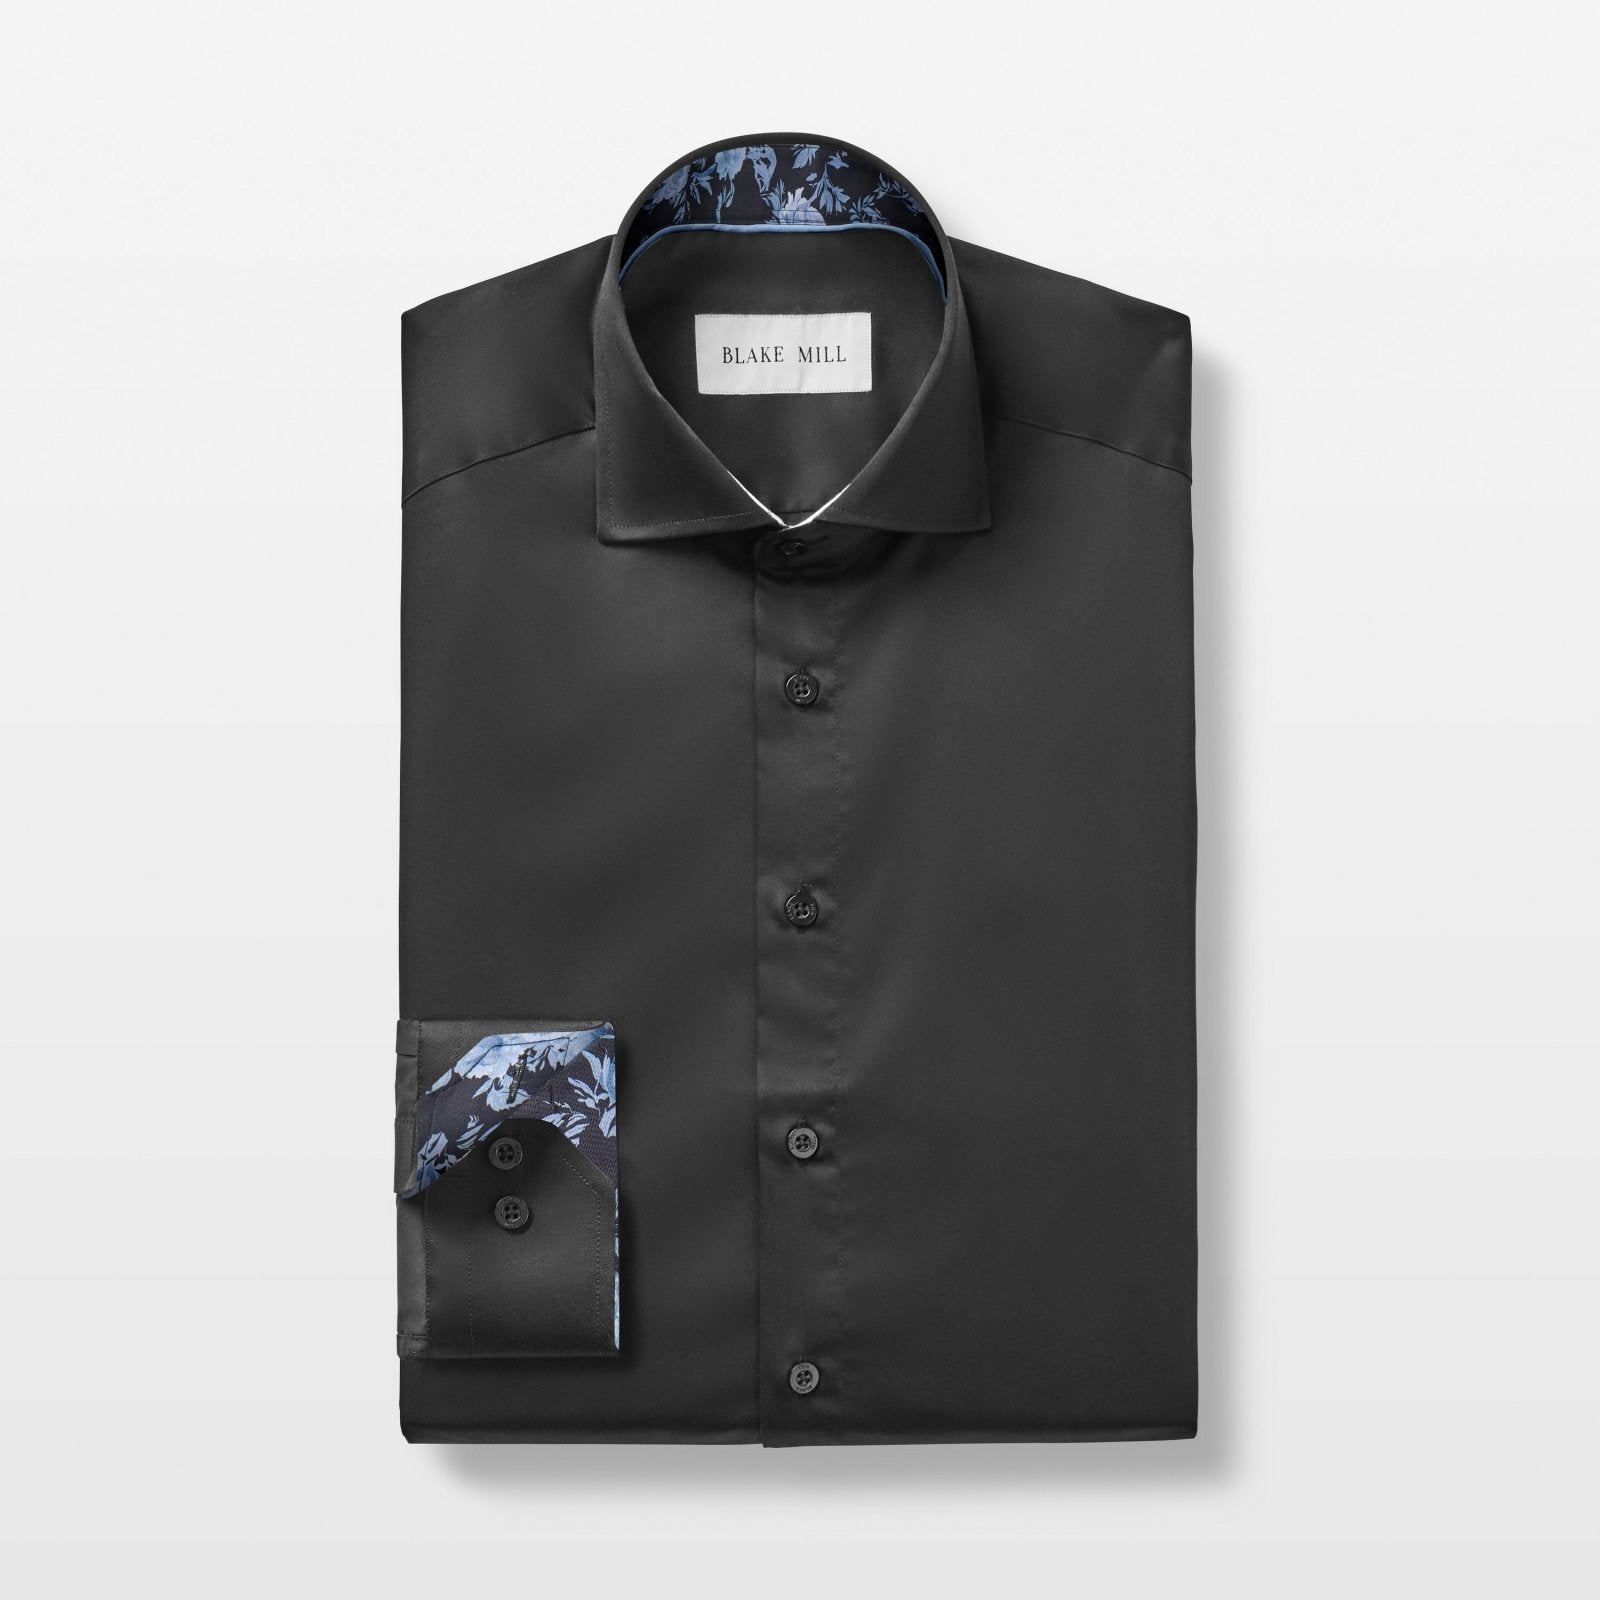 Black with Bed of Roses Accent Shirt - Blake Mill